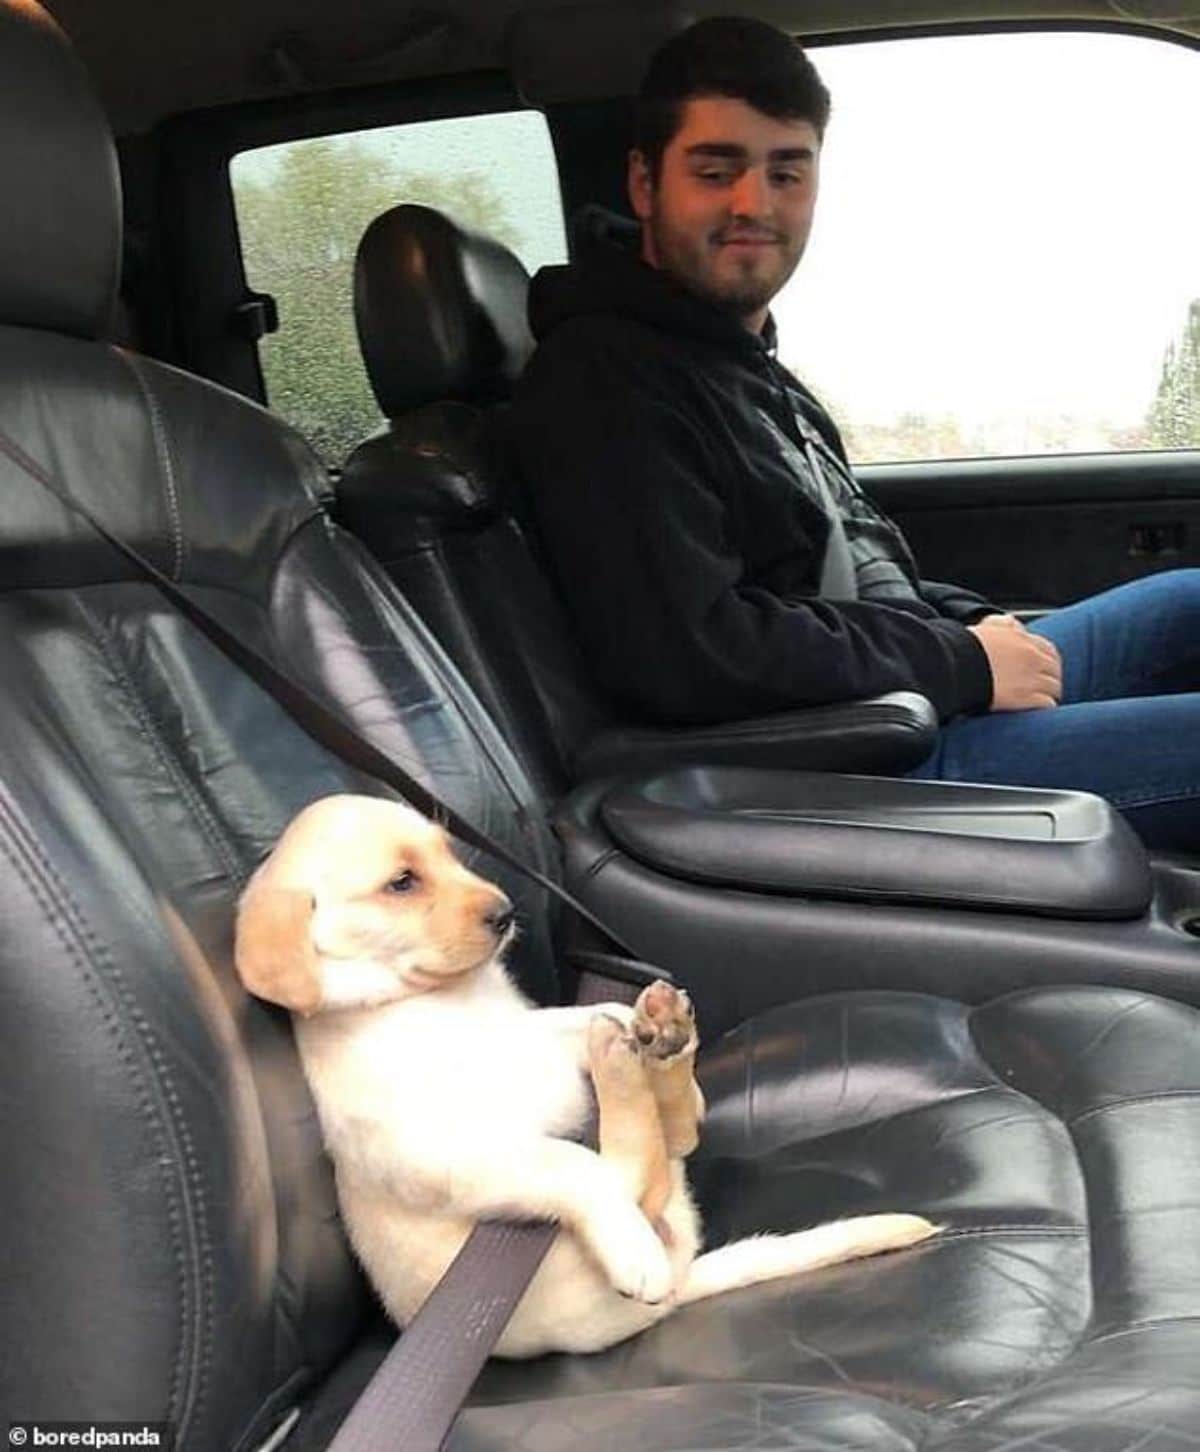 yellow labrador retriever puppy sitting belly up and with the seat belt on in the passenger seat next to a man